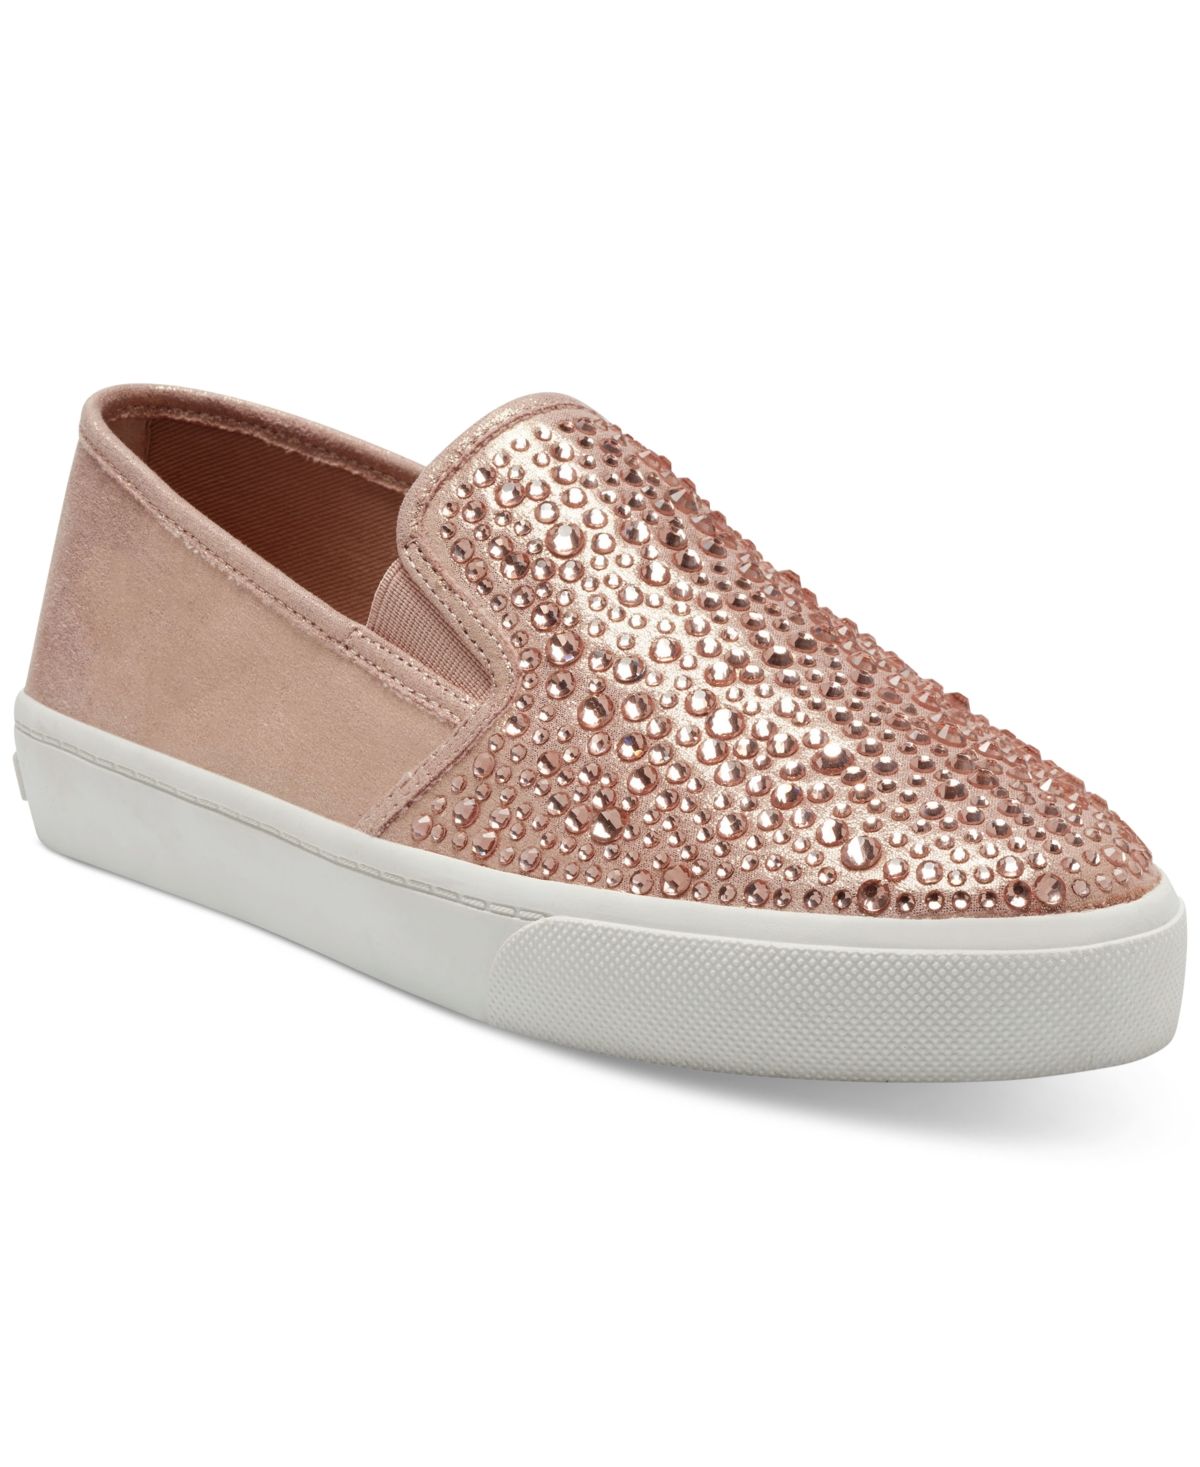 Inc International Concepts Sammee Slip-On Sneakers, Created for Macy's Women's Shoes | Macys (US)